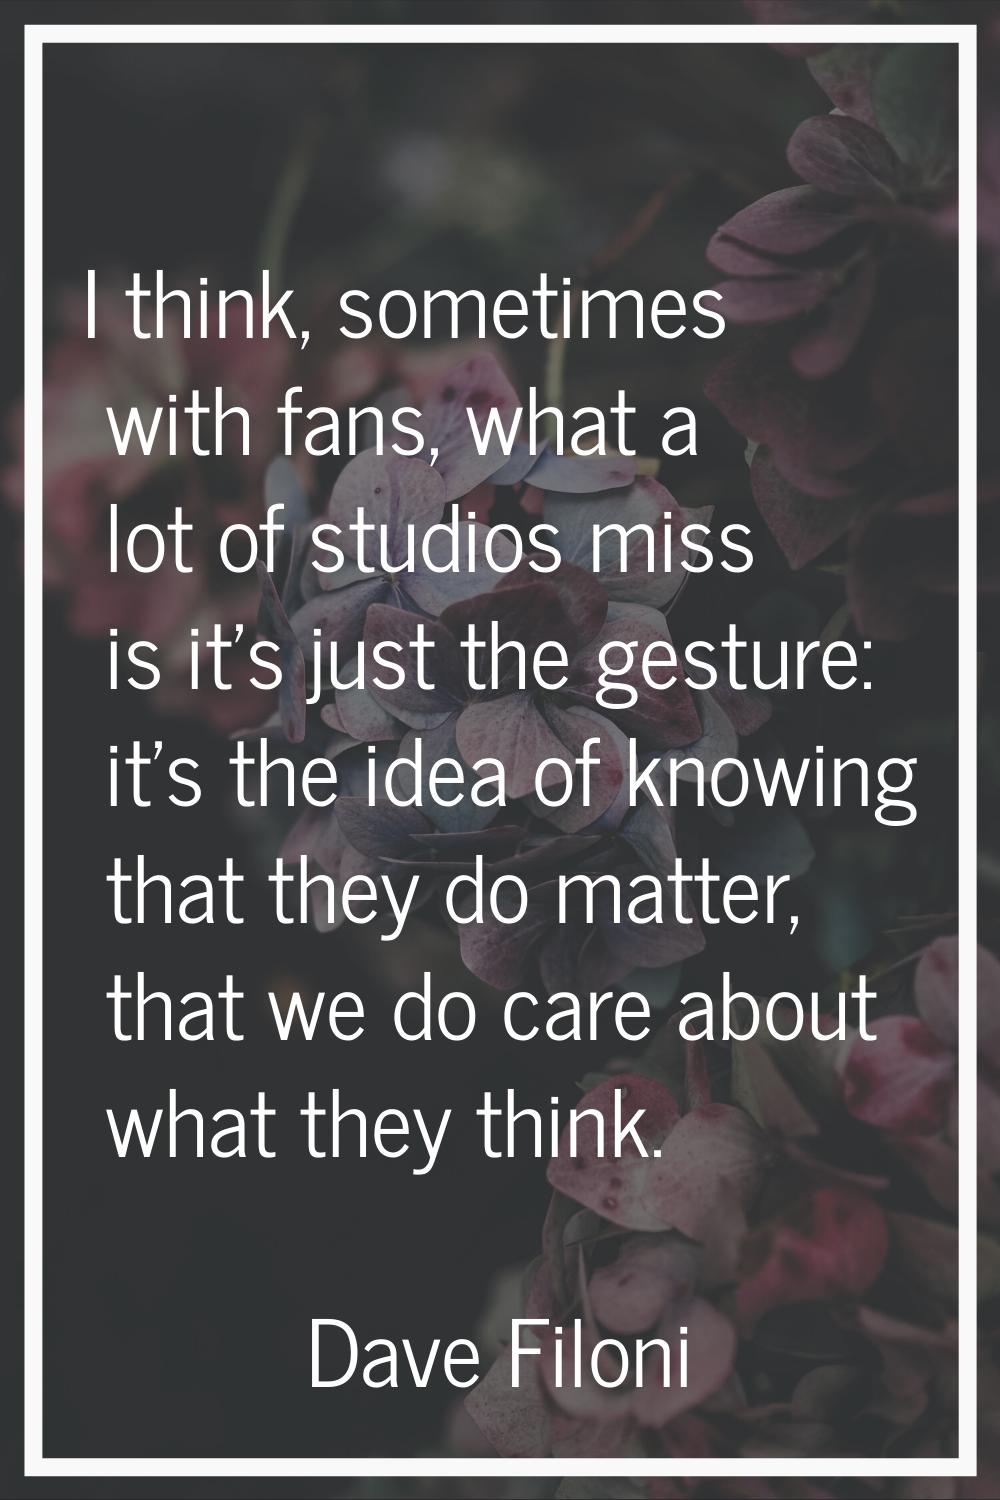 I think, sometimes with fans, what a lot of studios miss is it's just the gesture: it's the idea of